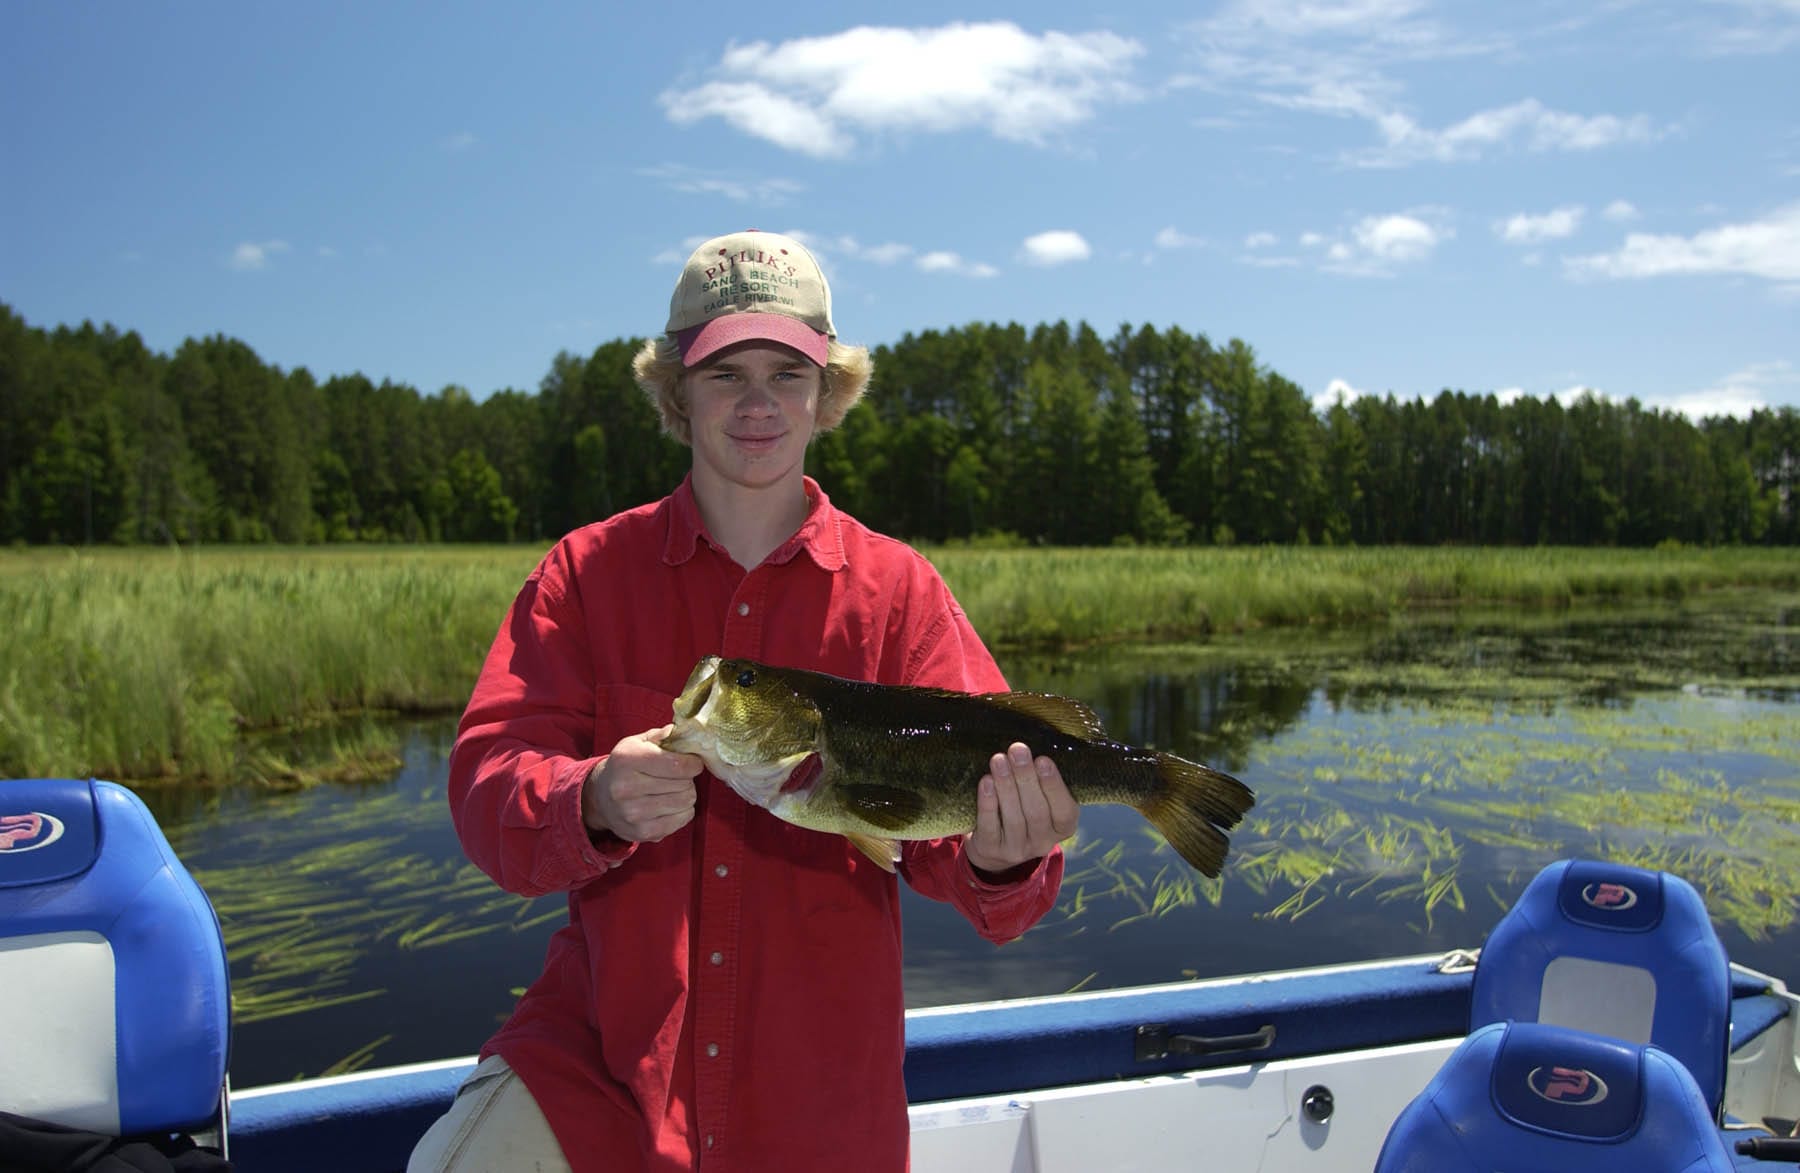 Young man on lake holding a bass.